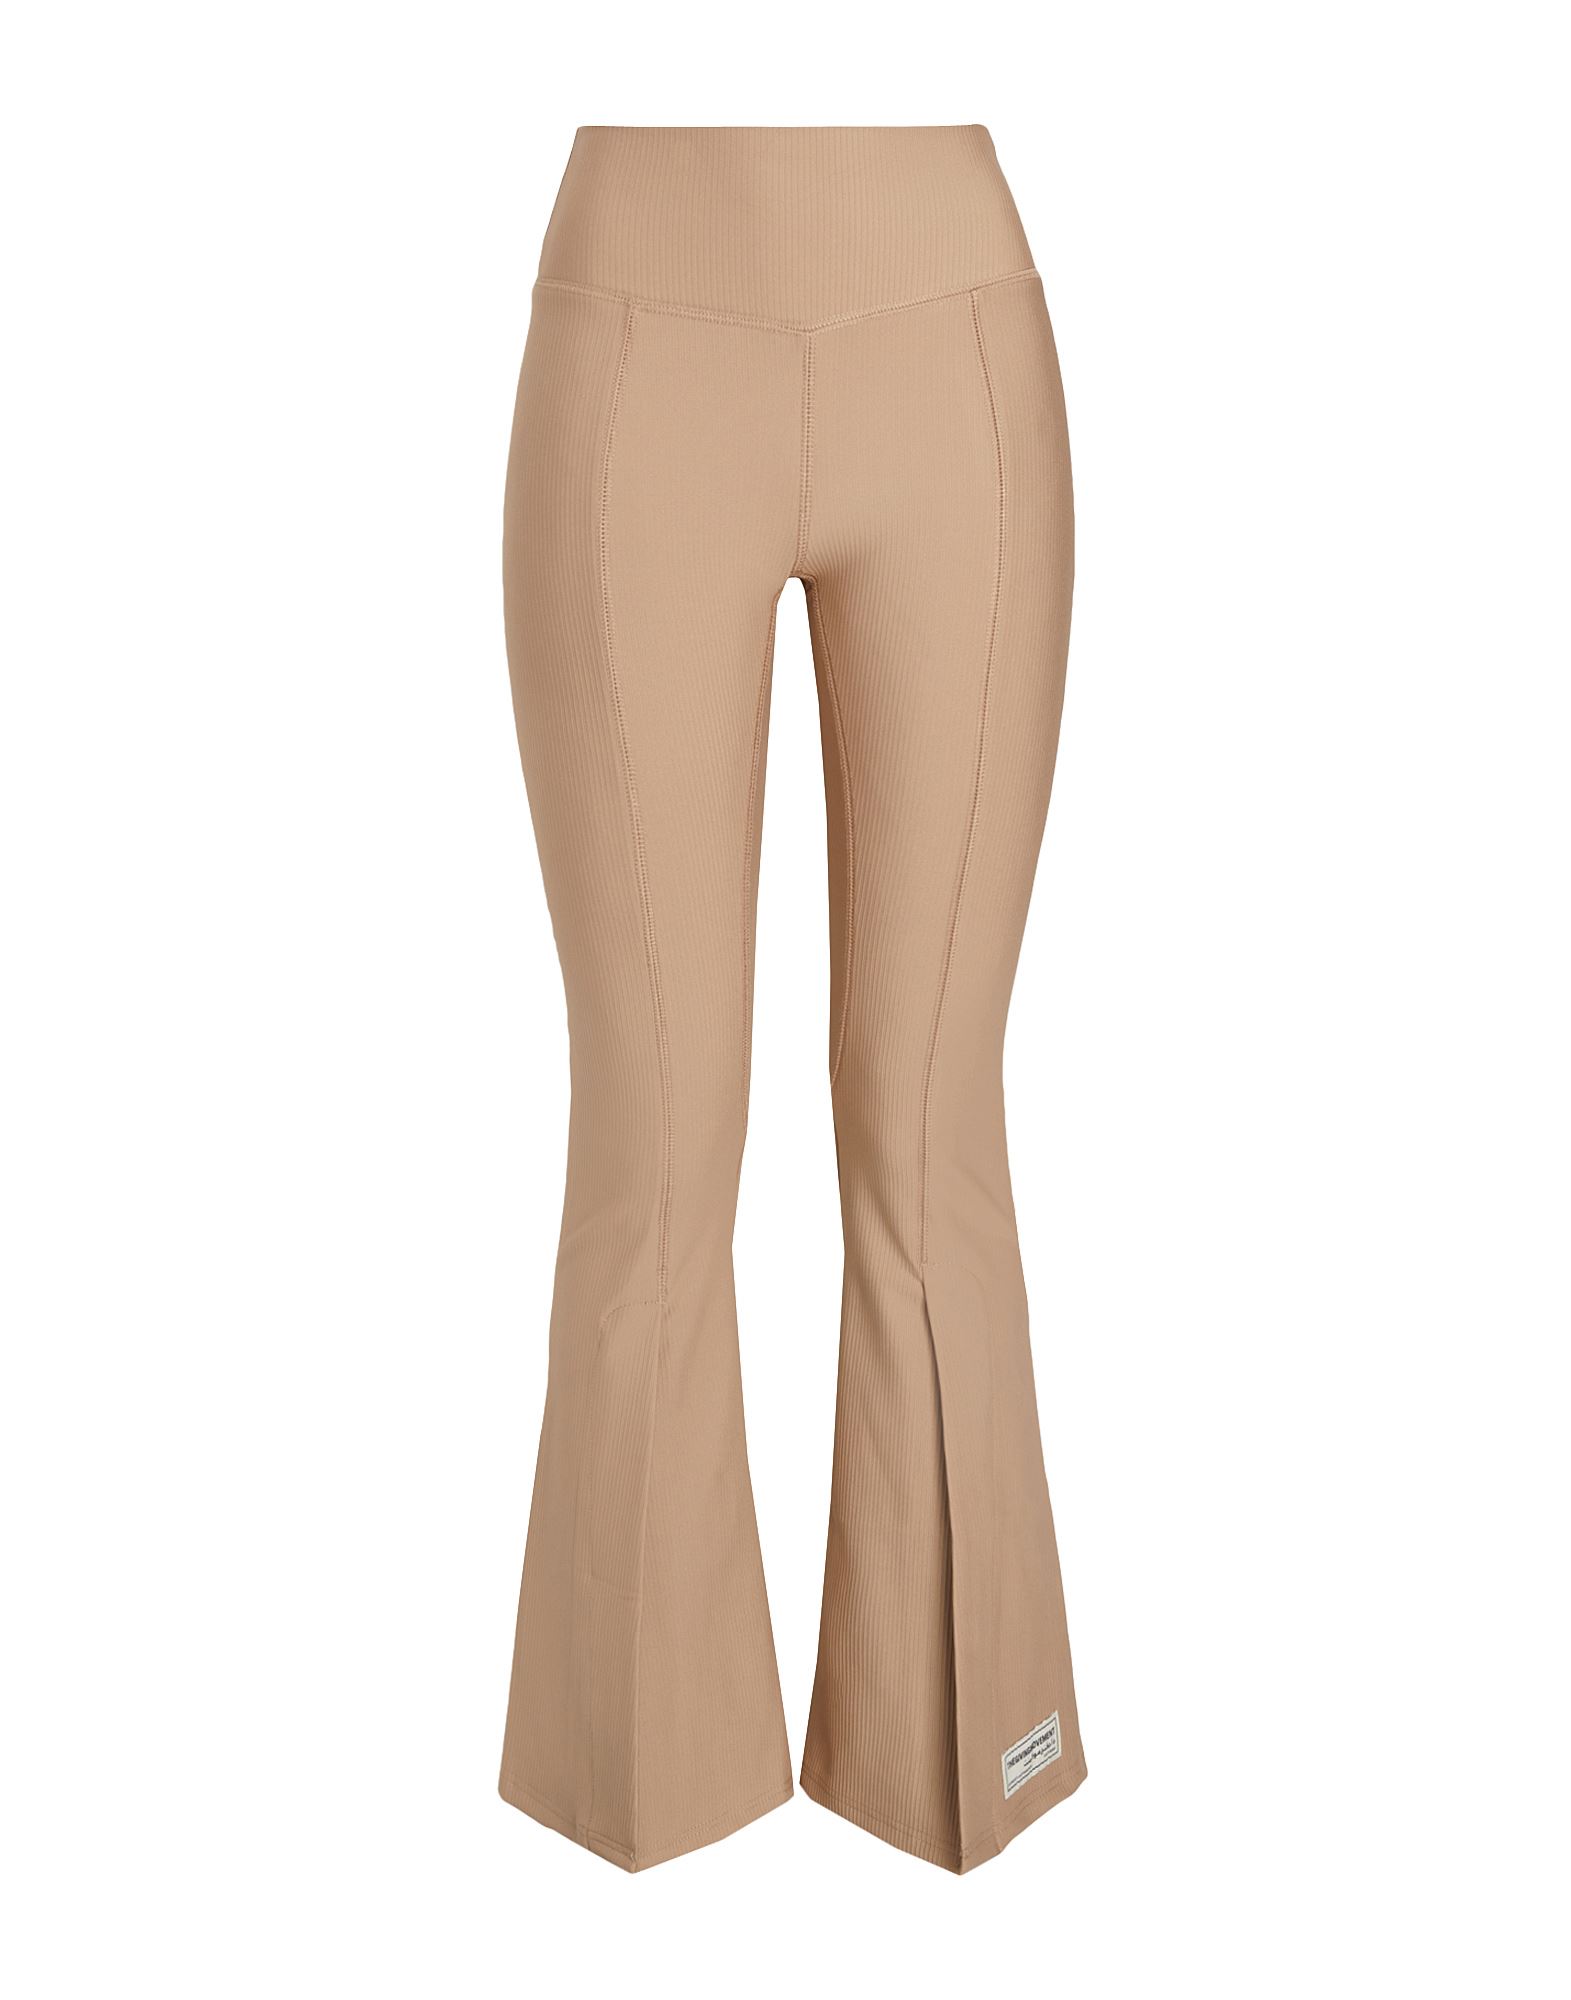 THE GIVING MOVEMENT X YOOX THE GIVING MOVEMENT X YOOX WOMAN PANTS LIGHT BROWN SIZE M RECYCLED POLYESTER, RECYCLED ELASTANE